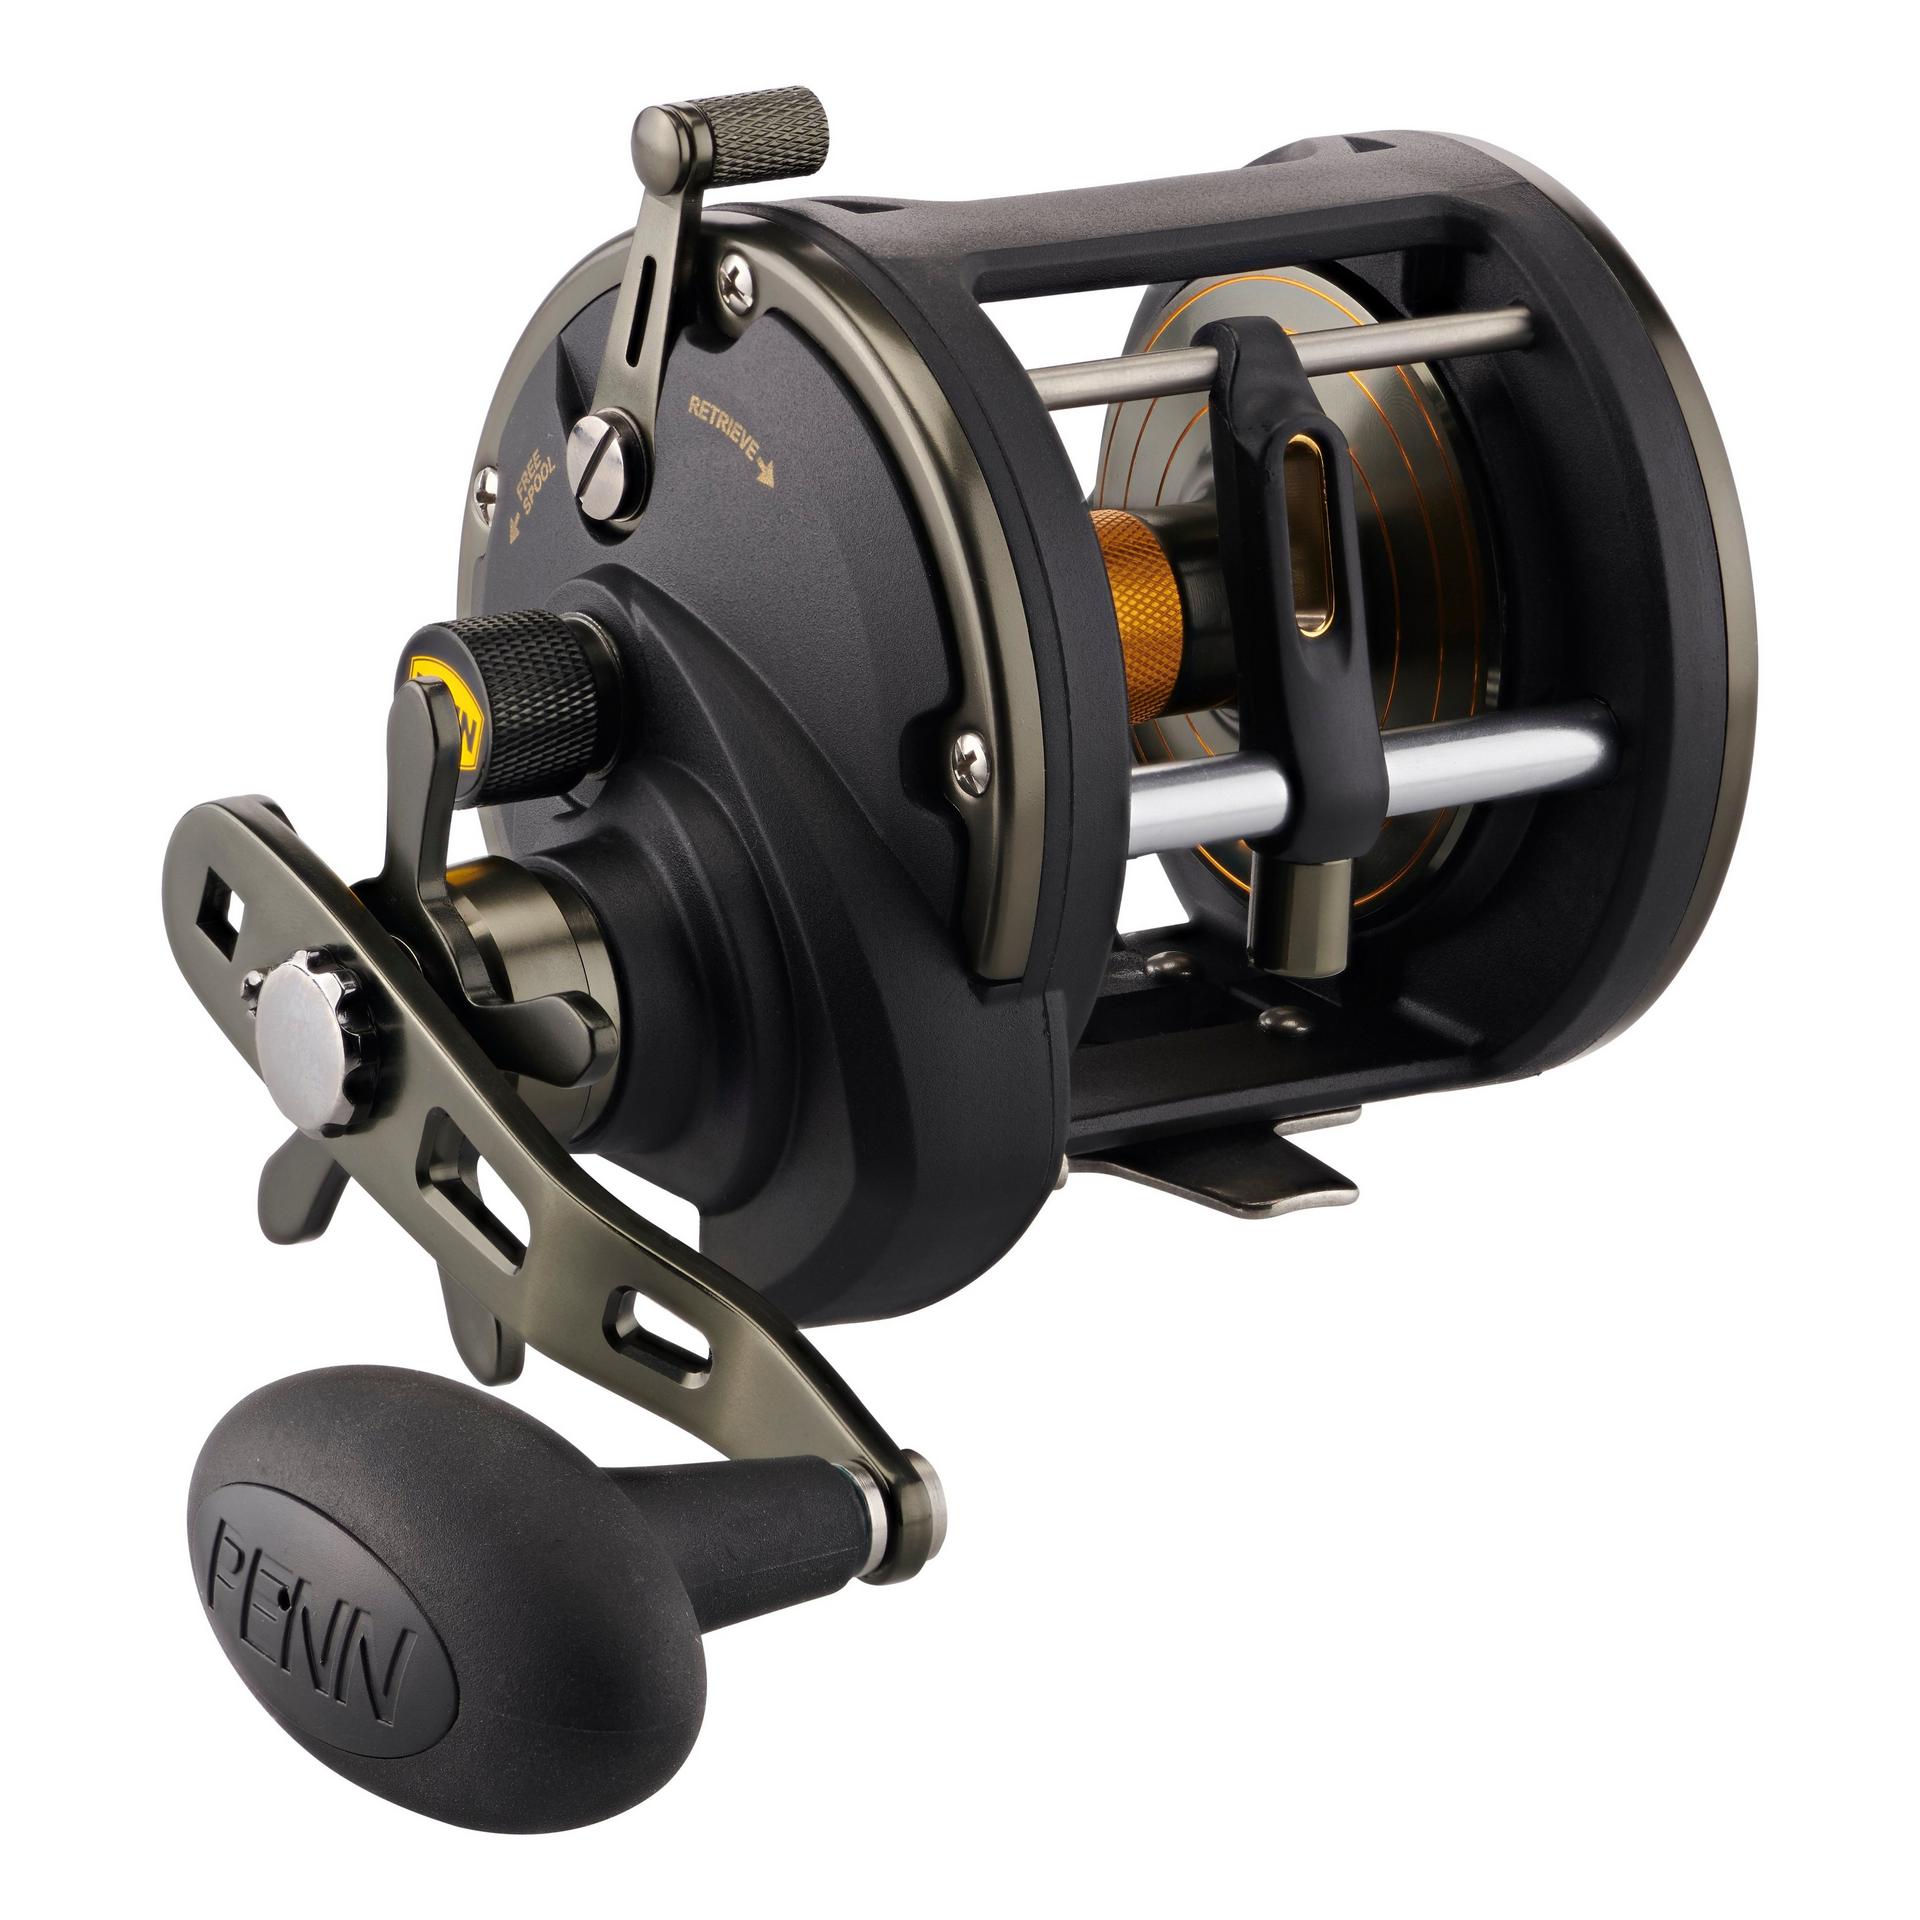 Left vs Right-handed Fishing Reel: Which is Right for You?